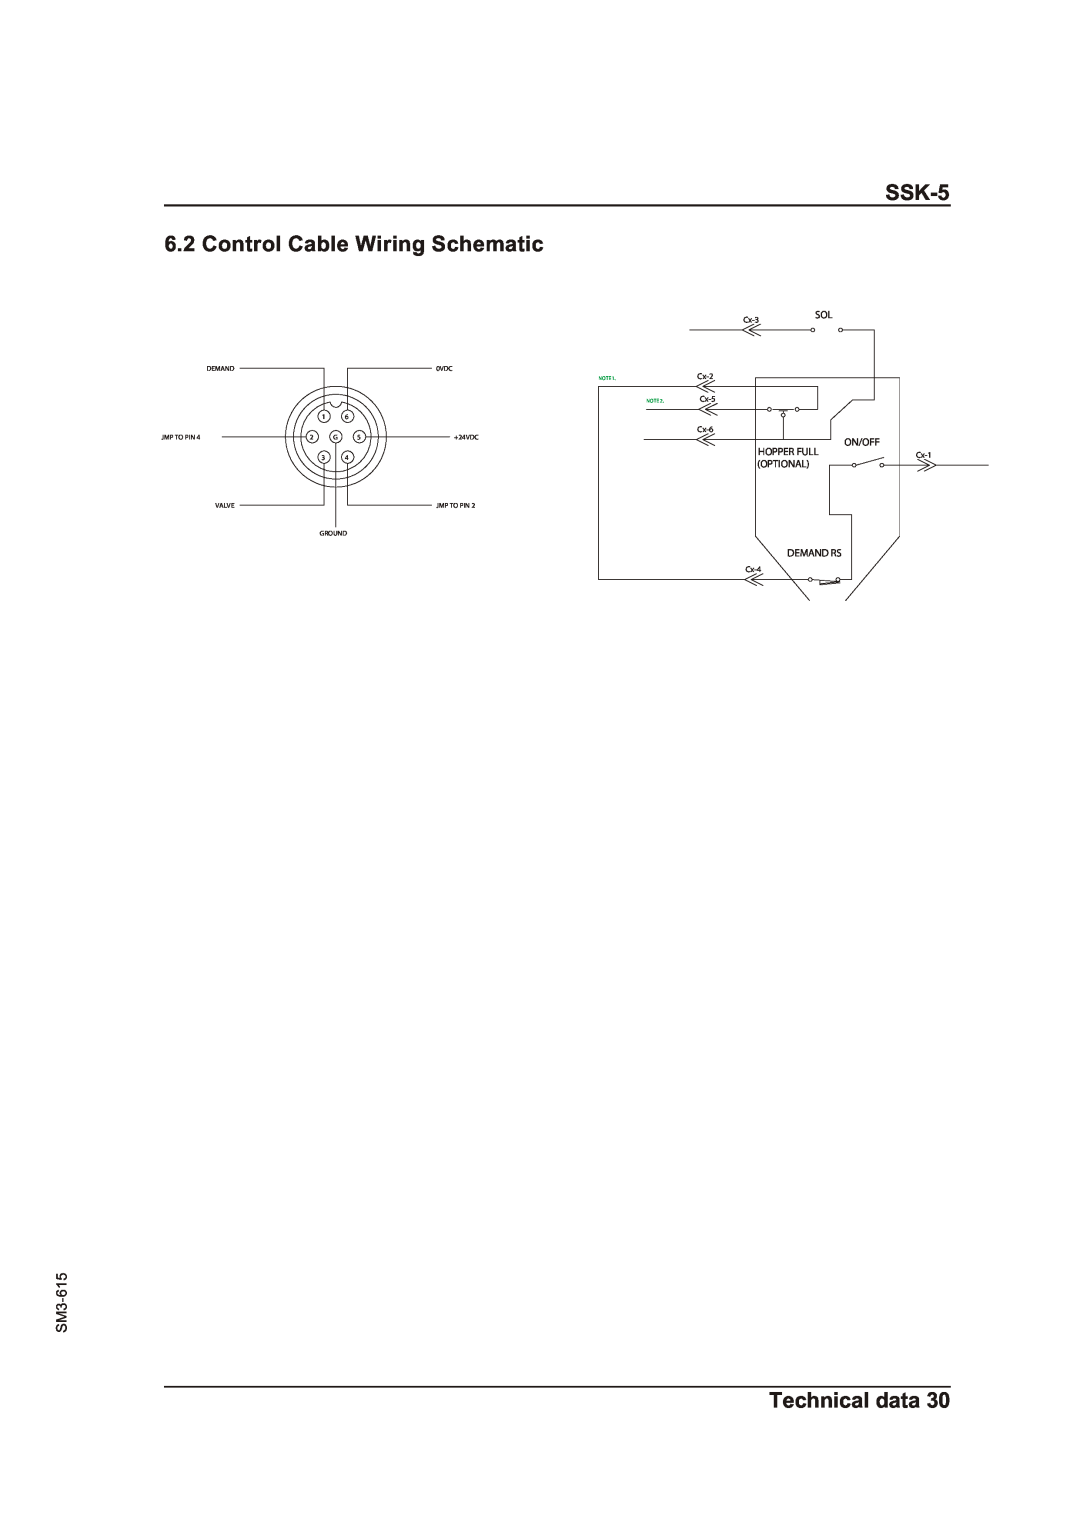 Sterling SSK-5 6.2 Control Cable Wiring Schematic, Technical data, SM3-615, Hopper Full, Optional, Demand Rs, On/Off 